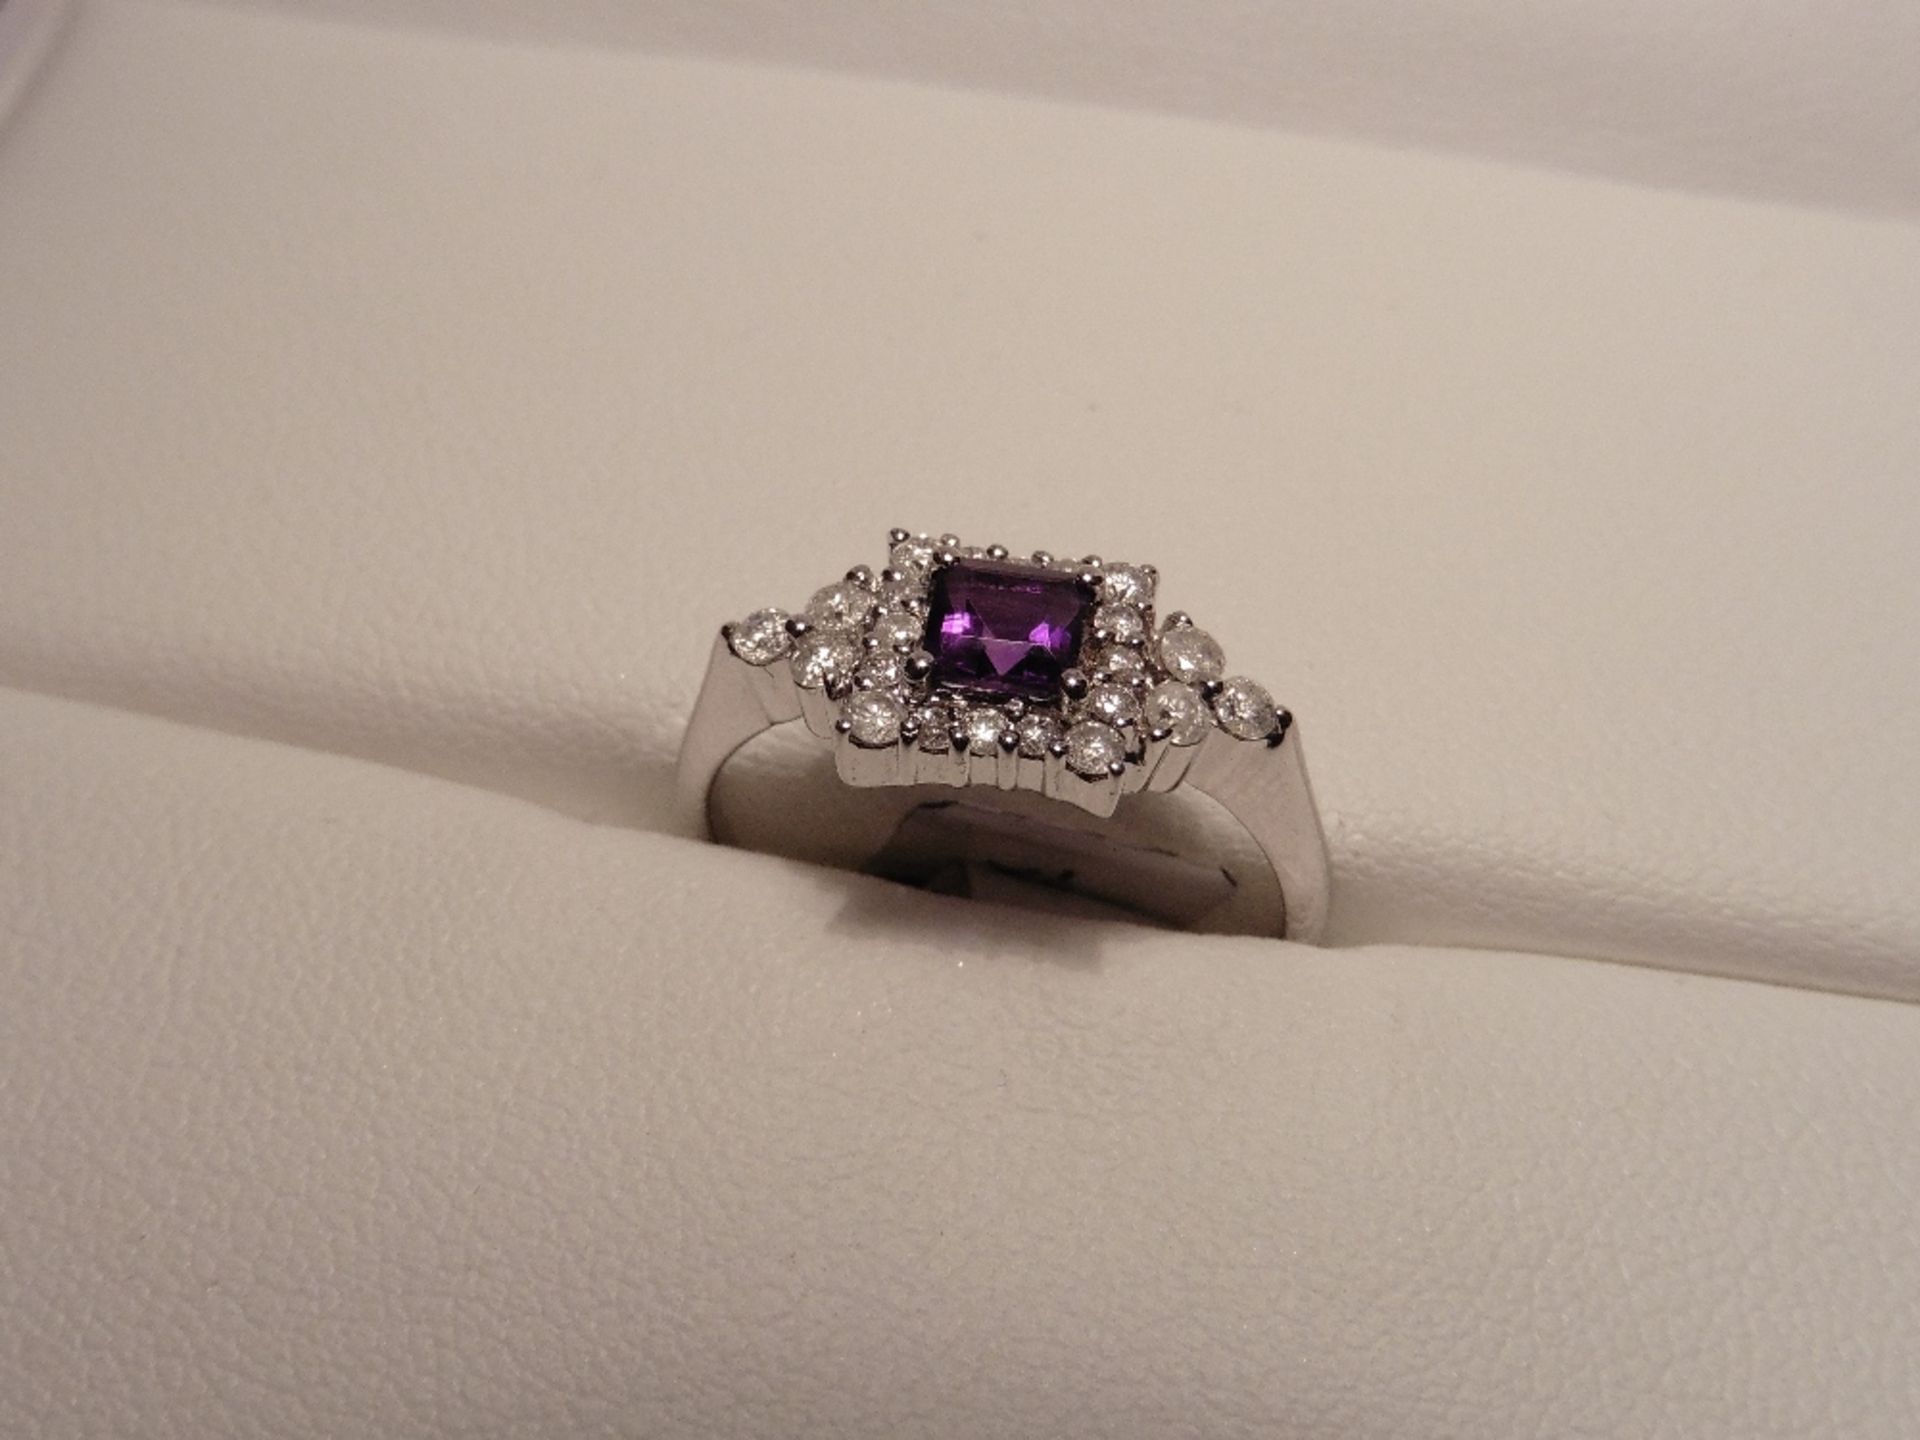 9ct white gold amethyst and diamond dress ring set with a single princess cut amethyst weighing 0.30